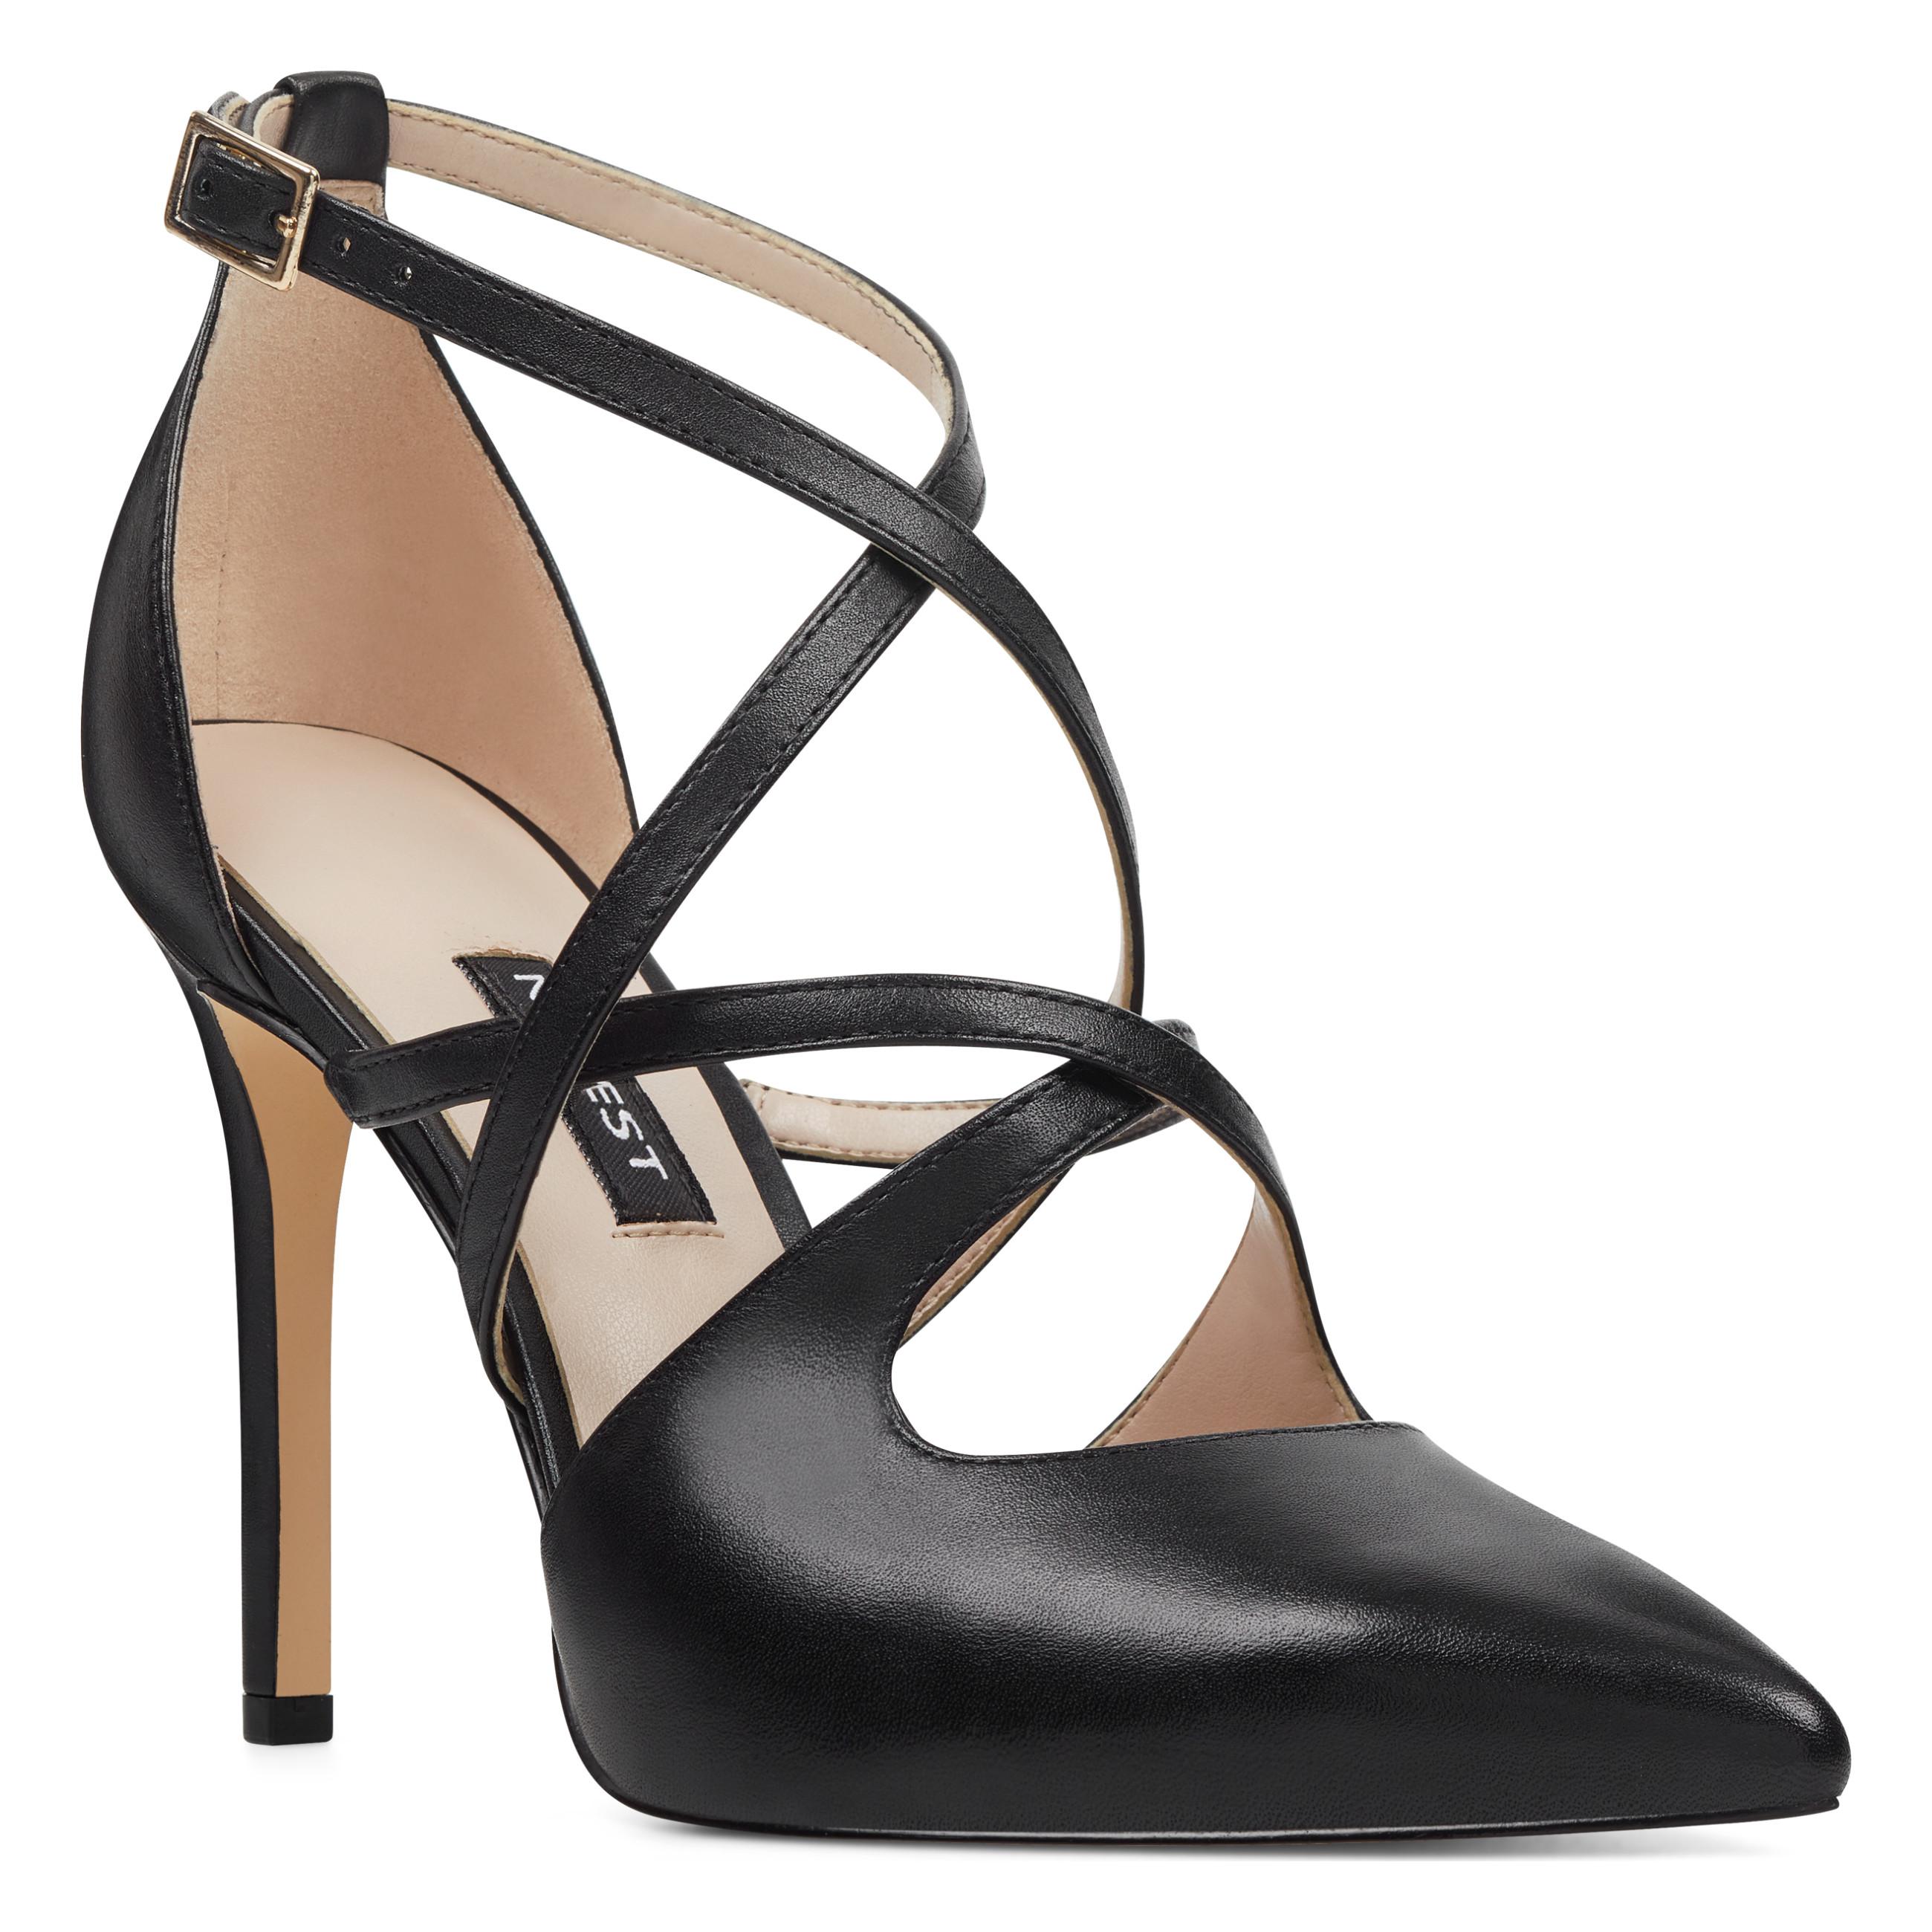 Nine West Tuluiza Strappy Pumps in Black Leather (Black) - Lyst